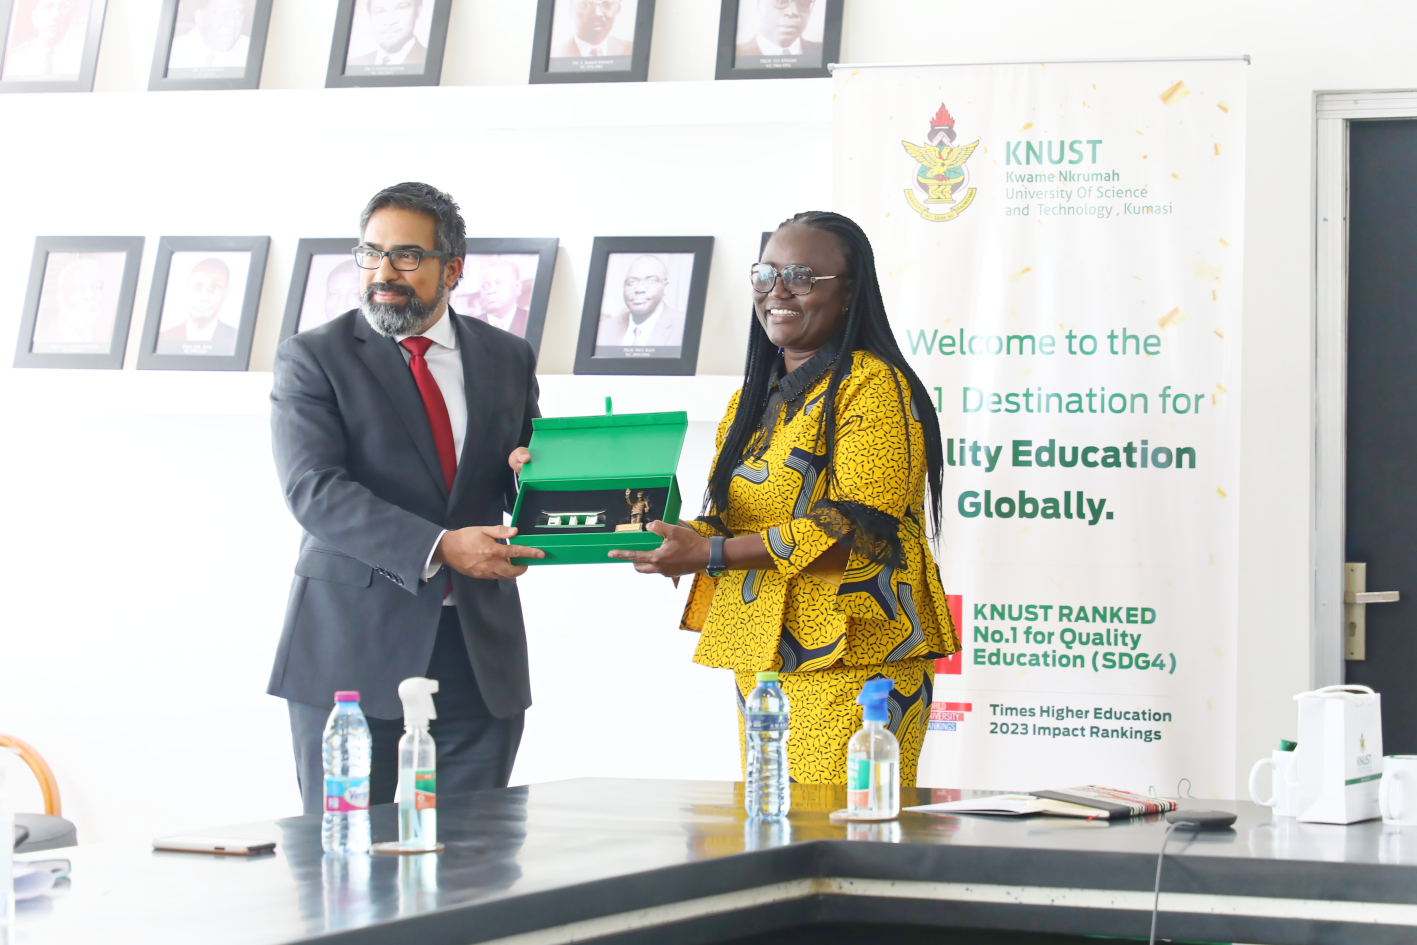 Kumar Iyer CMG, the Director General (DG), Economics, Science and Technology at the Foreign, Commonwealth and Development Office (FCDO), UK, and Prof. Mrs. Rita Akosua Dickson, Vice-Chancellor, KNUST